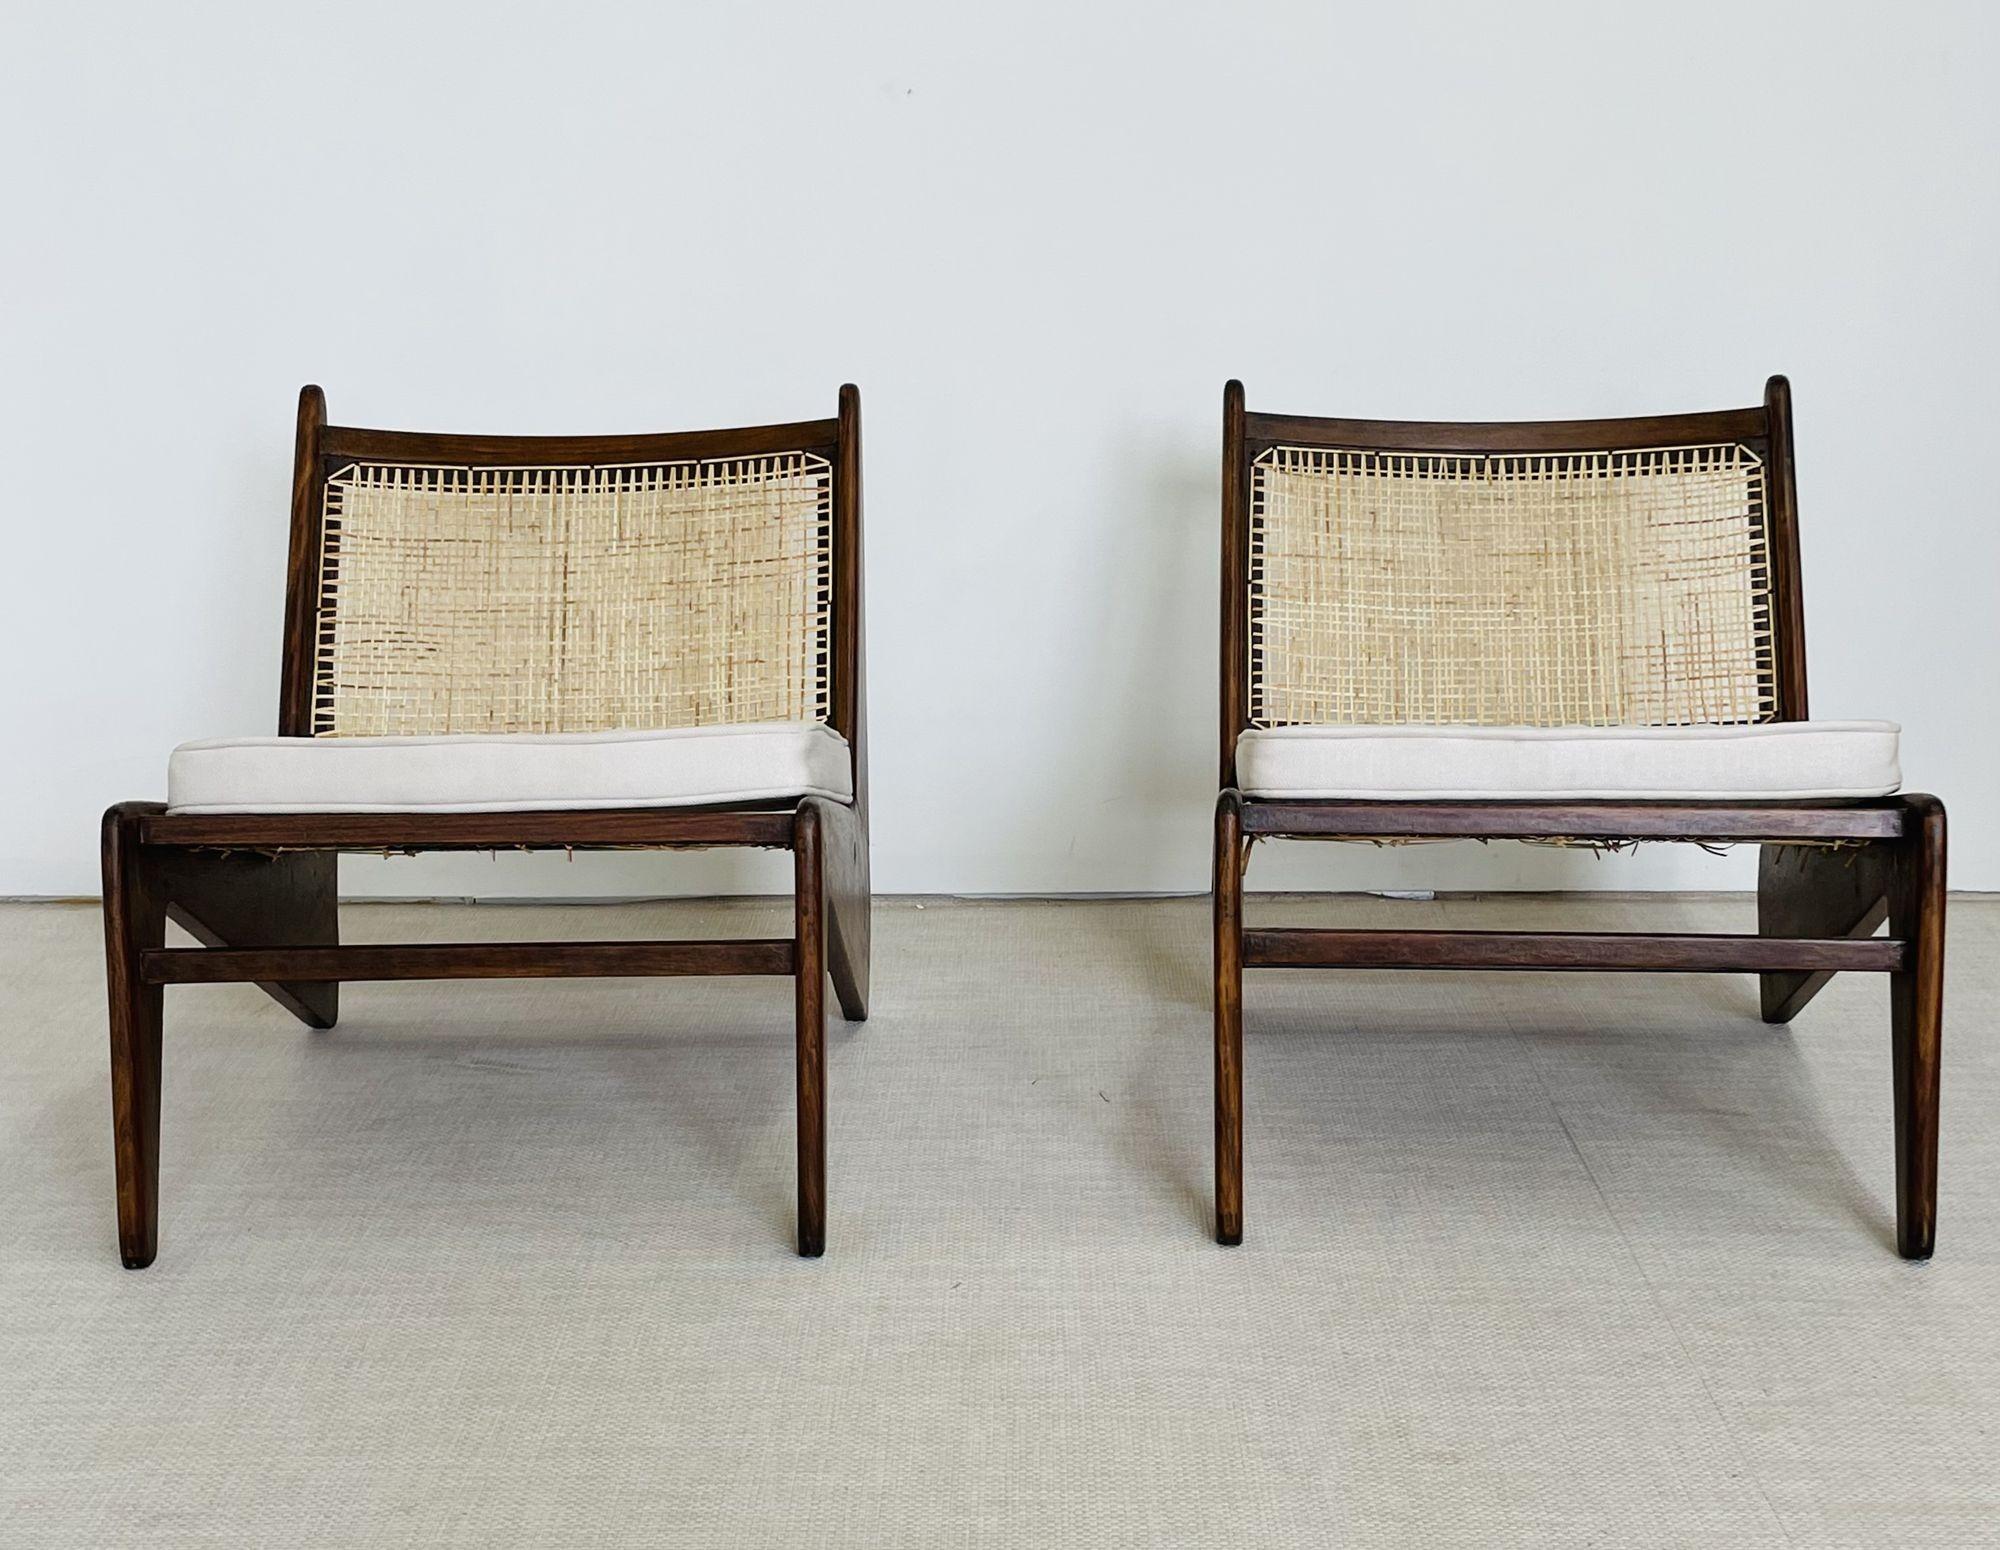 Mid-Century Modern Pierre Jeanneret, French Mid-Century, Kangaroo Chairs, Teak, Cane, India, 1960s For Sale